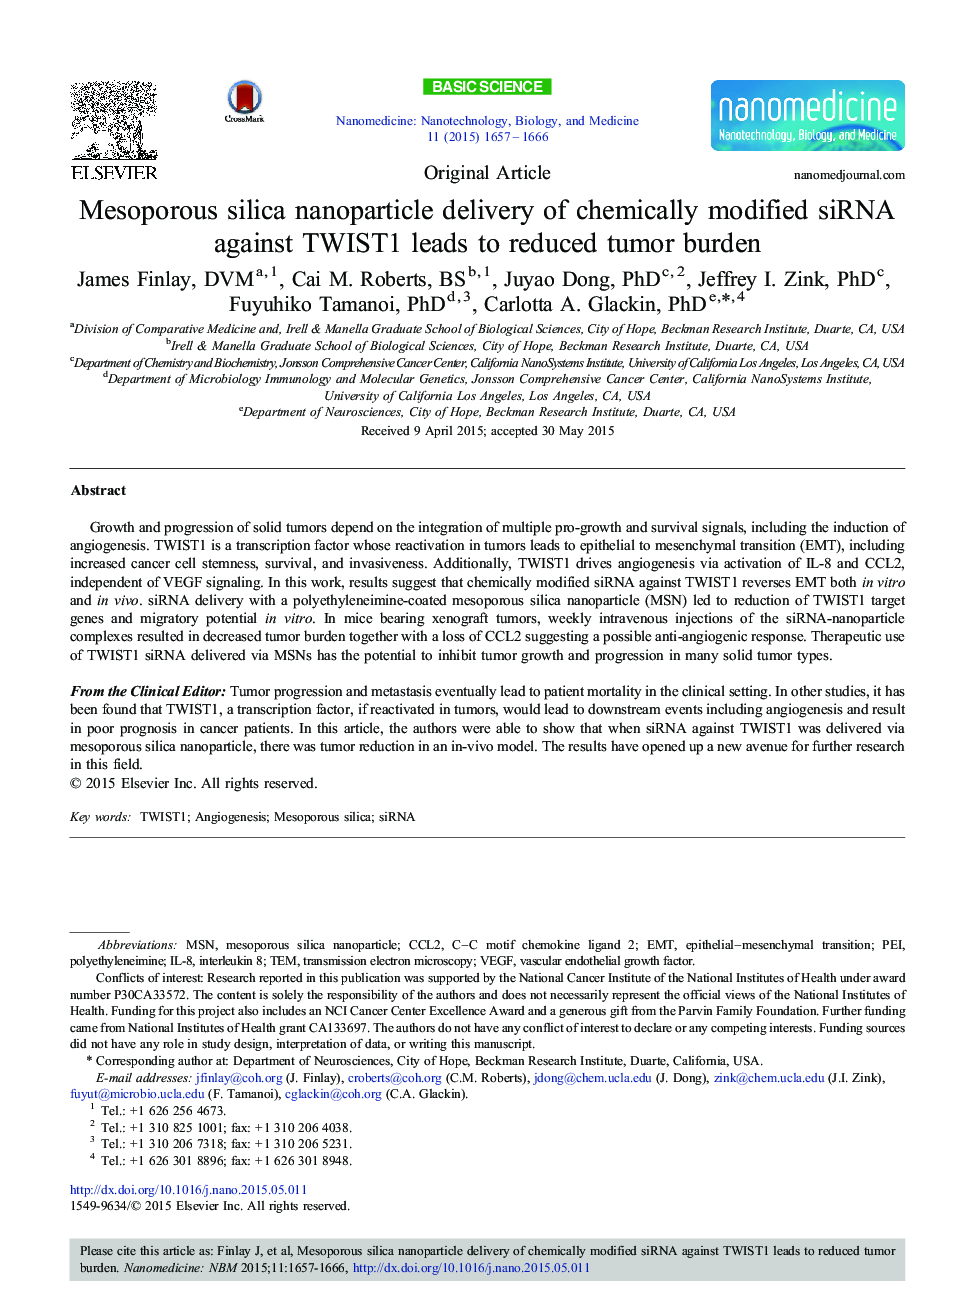 Mesoporous silica nanoparticle delivery of chemically modified siRNA against TWIST1 leads to reduced tumor burden 